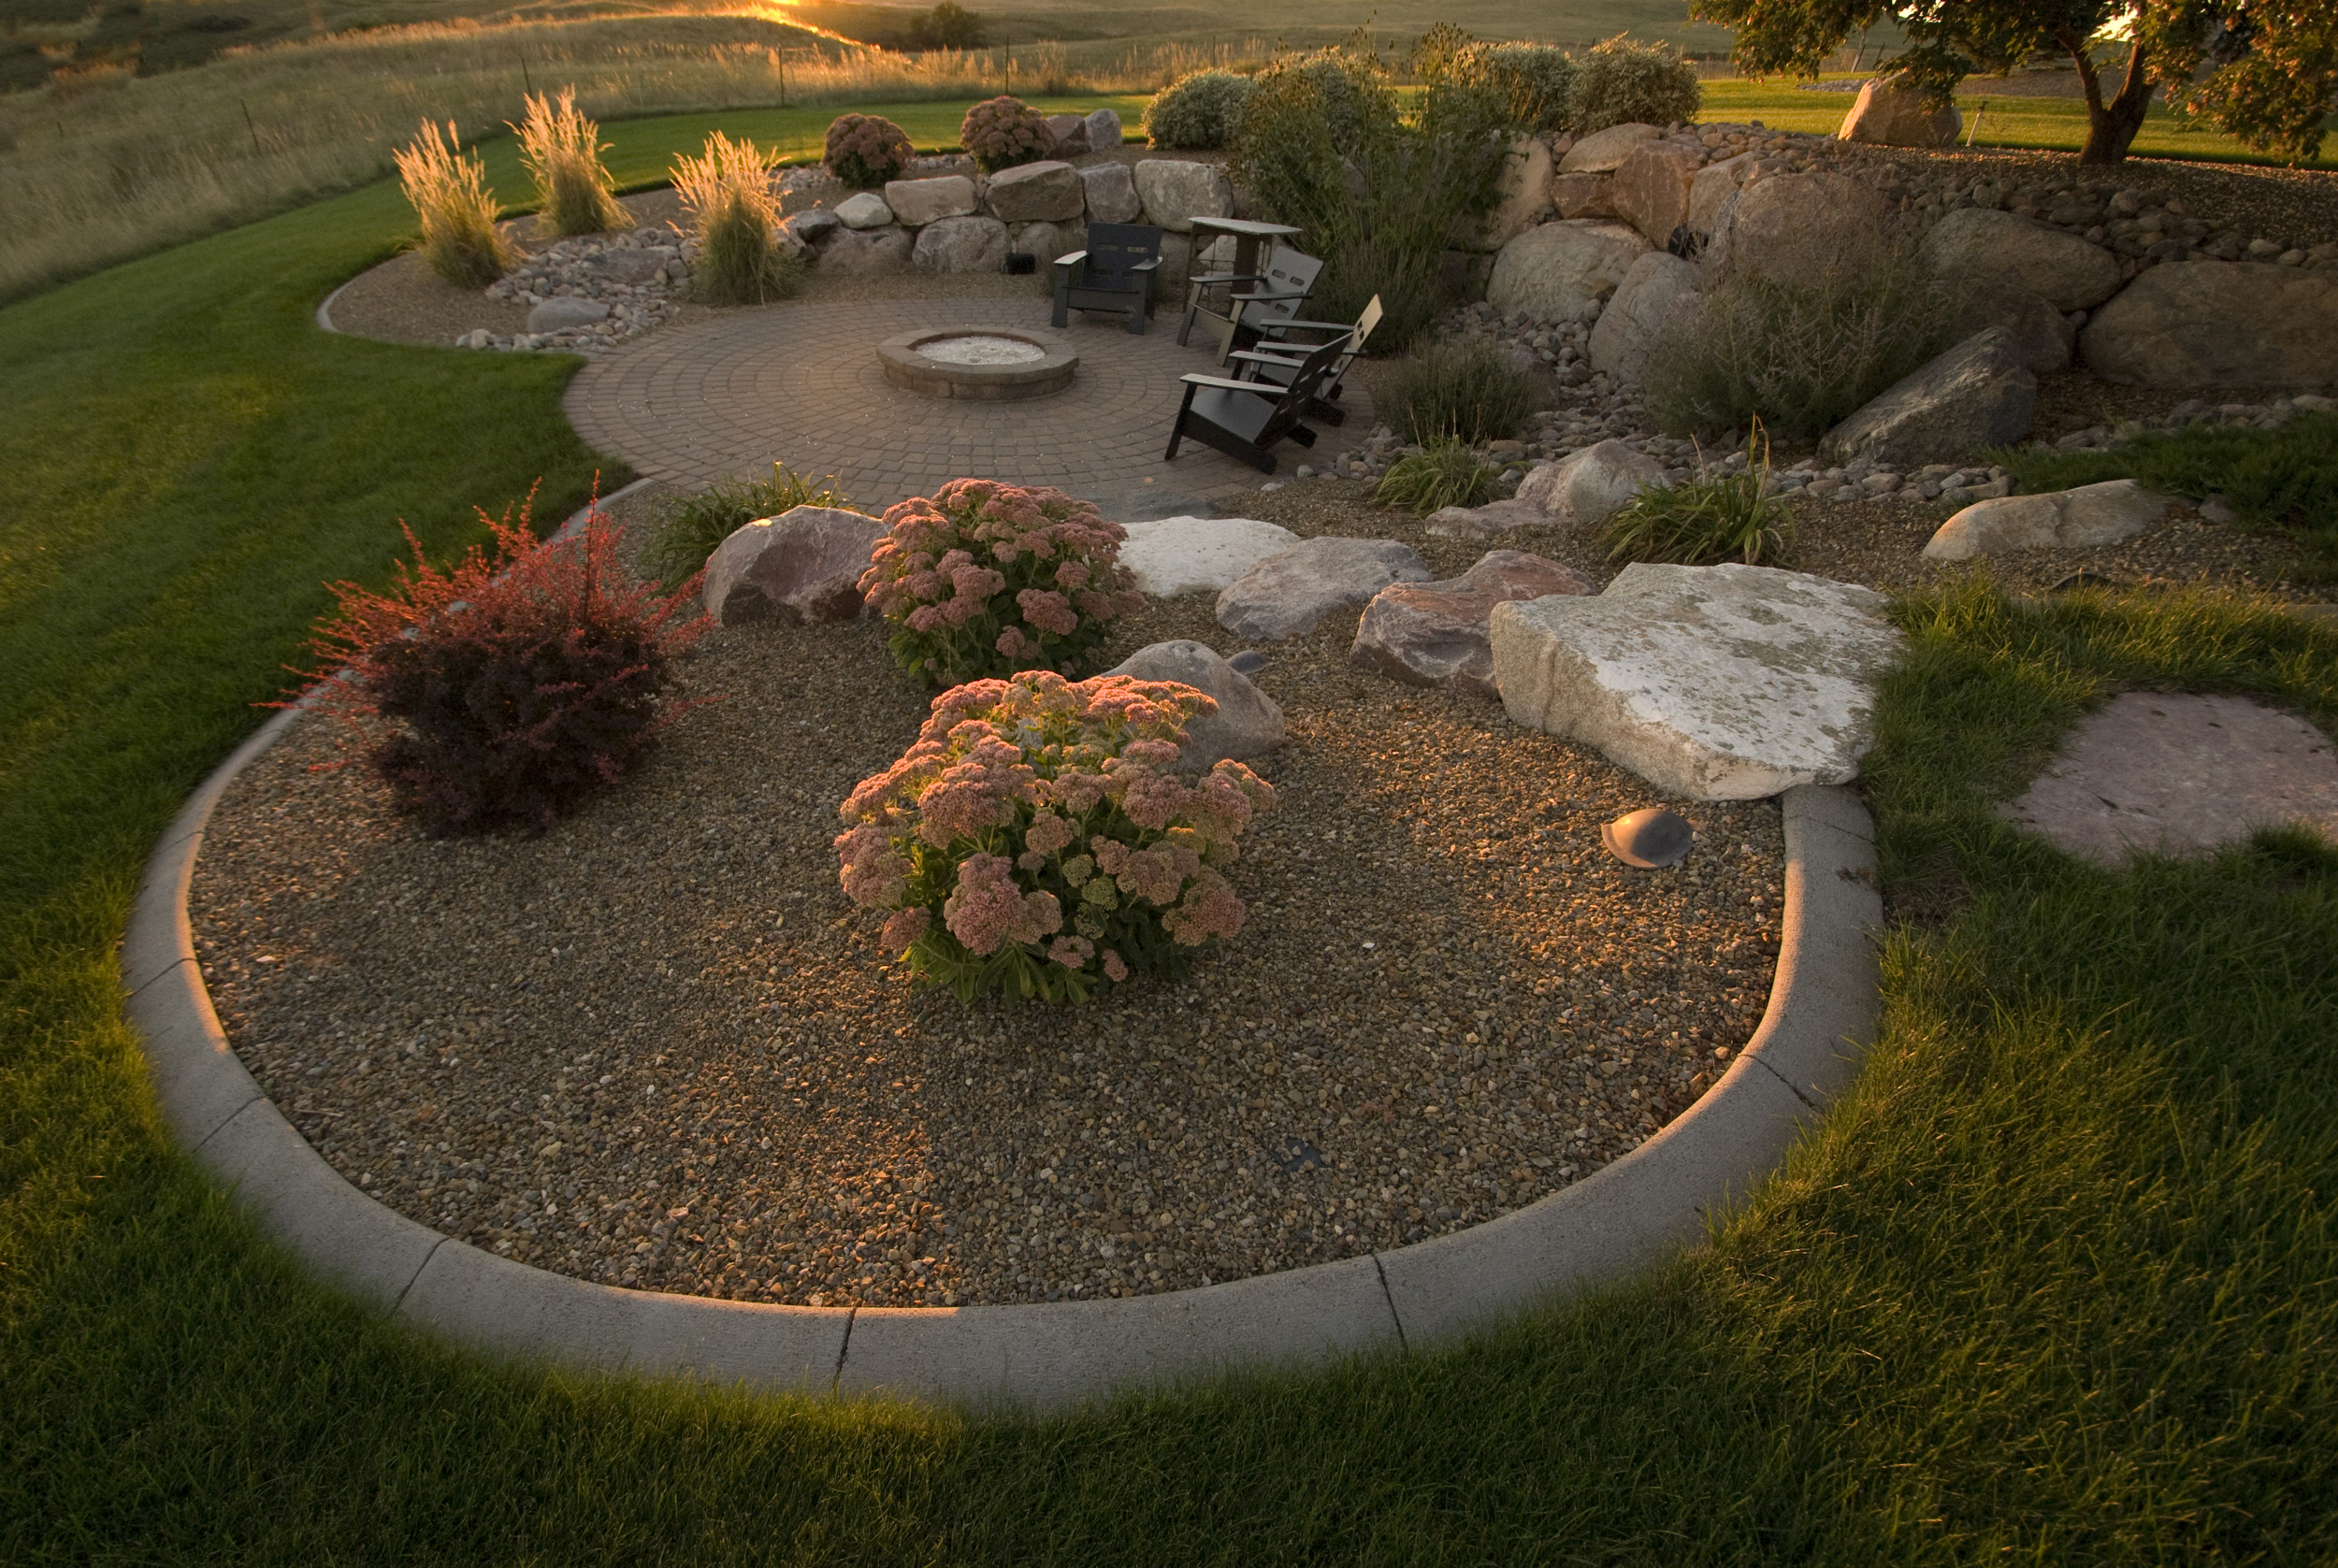  Boulder steps and flagstone lead guests to a patio and firepit surrounded by wock beds with shrubs and&nbsp; 